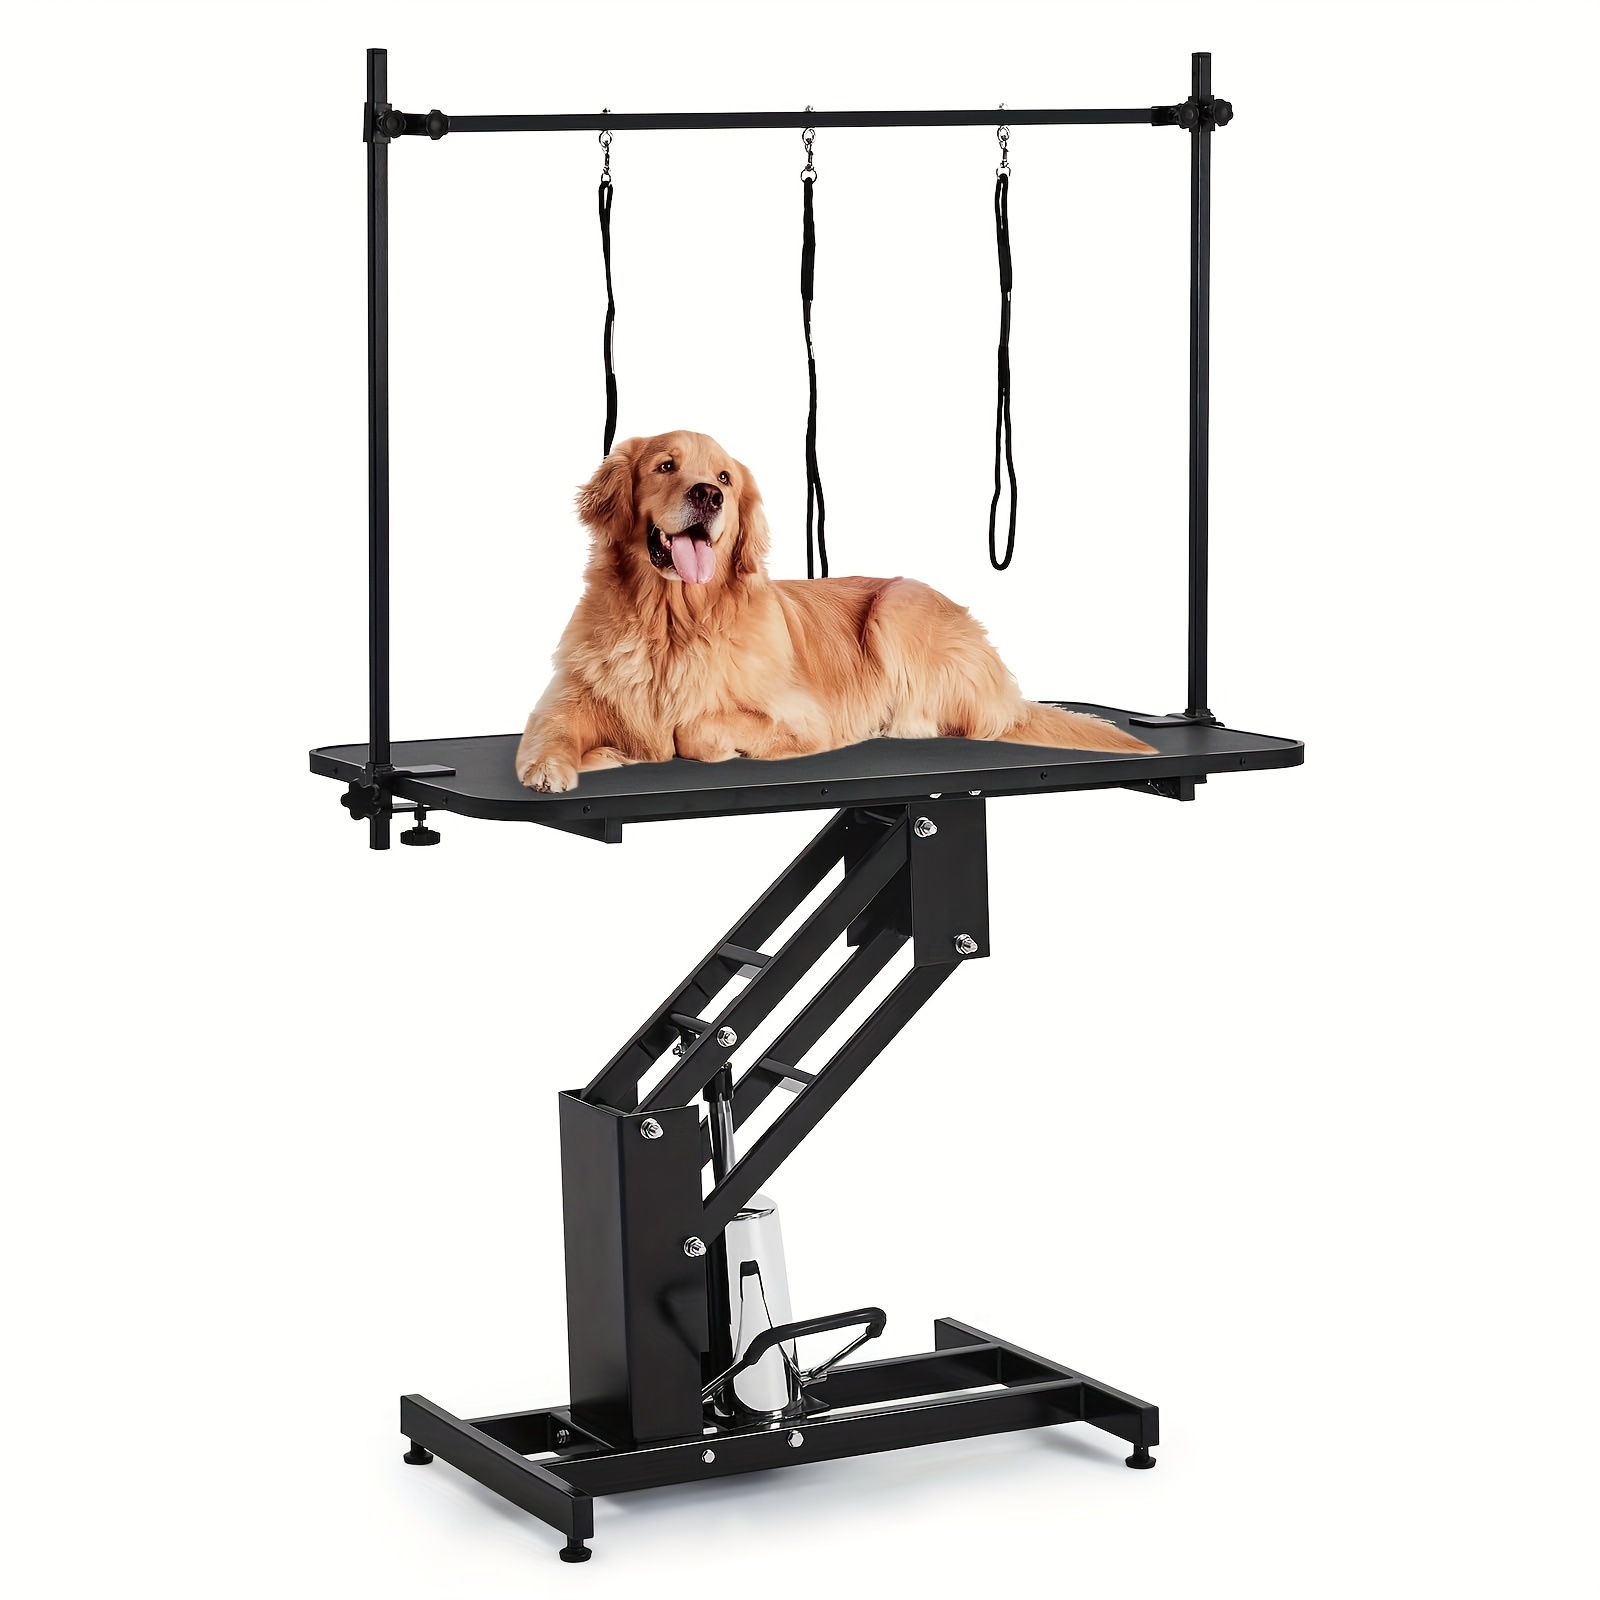 

43.3" Hydraulic Dog Grooming Table For Pet, Heavy Duty Structural Hydraulic Max Load 350lbs Professional Pet Grooming Table With Adjustable Overhead Arm & Noose Height Range 22''-39'' (black/white)